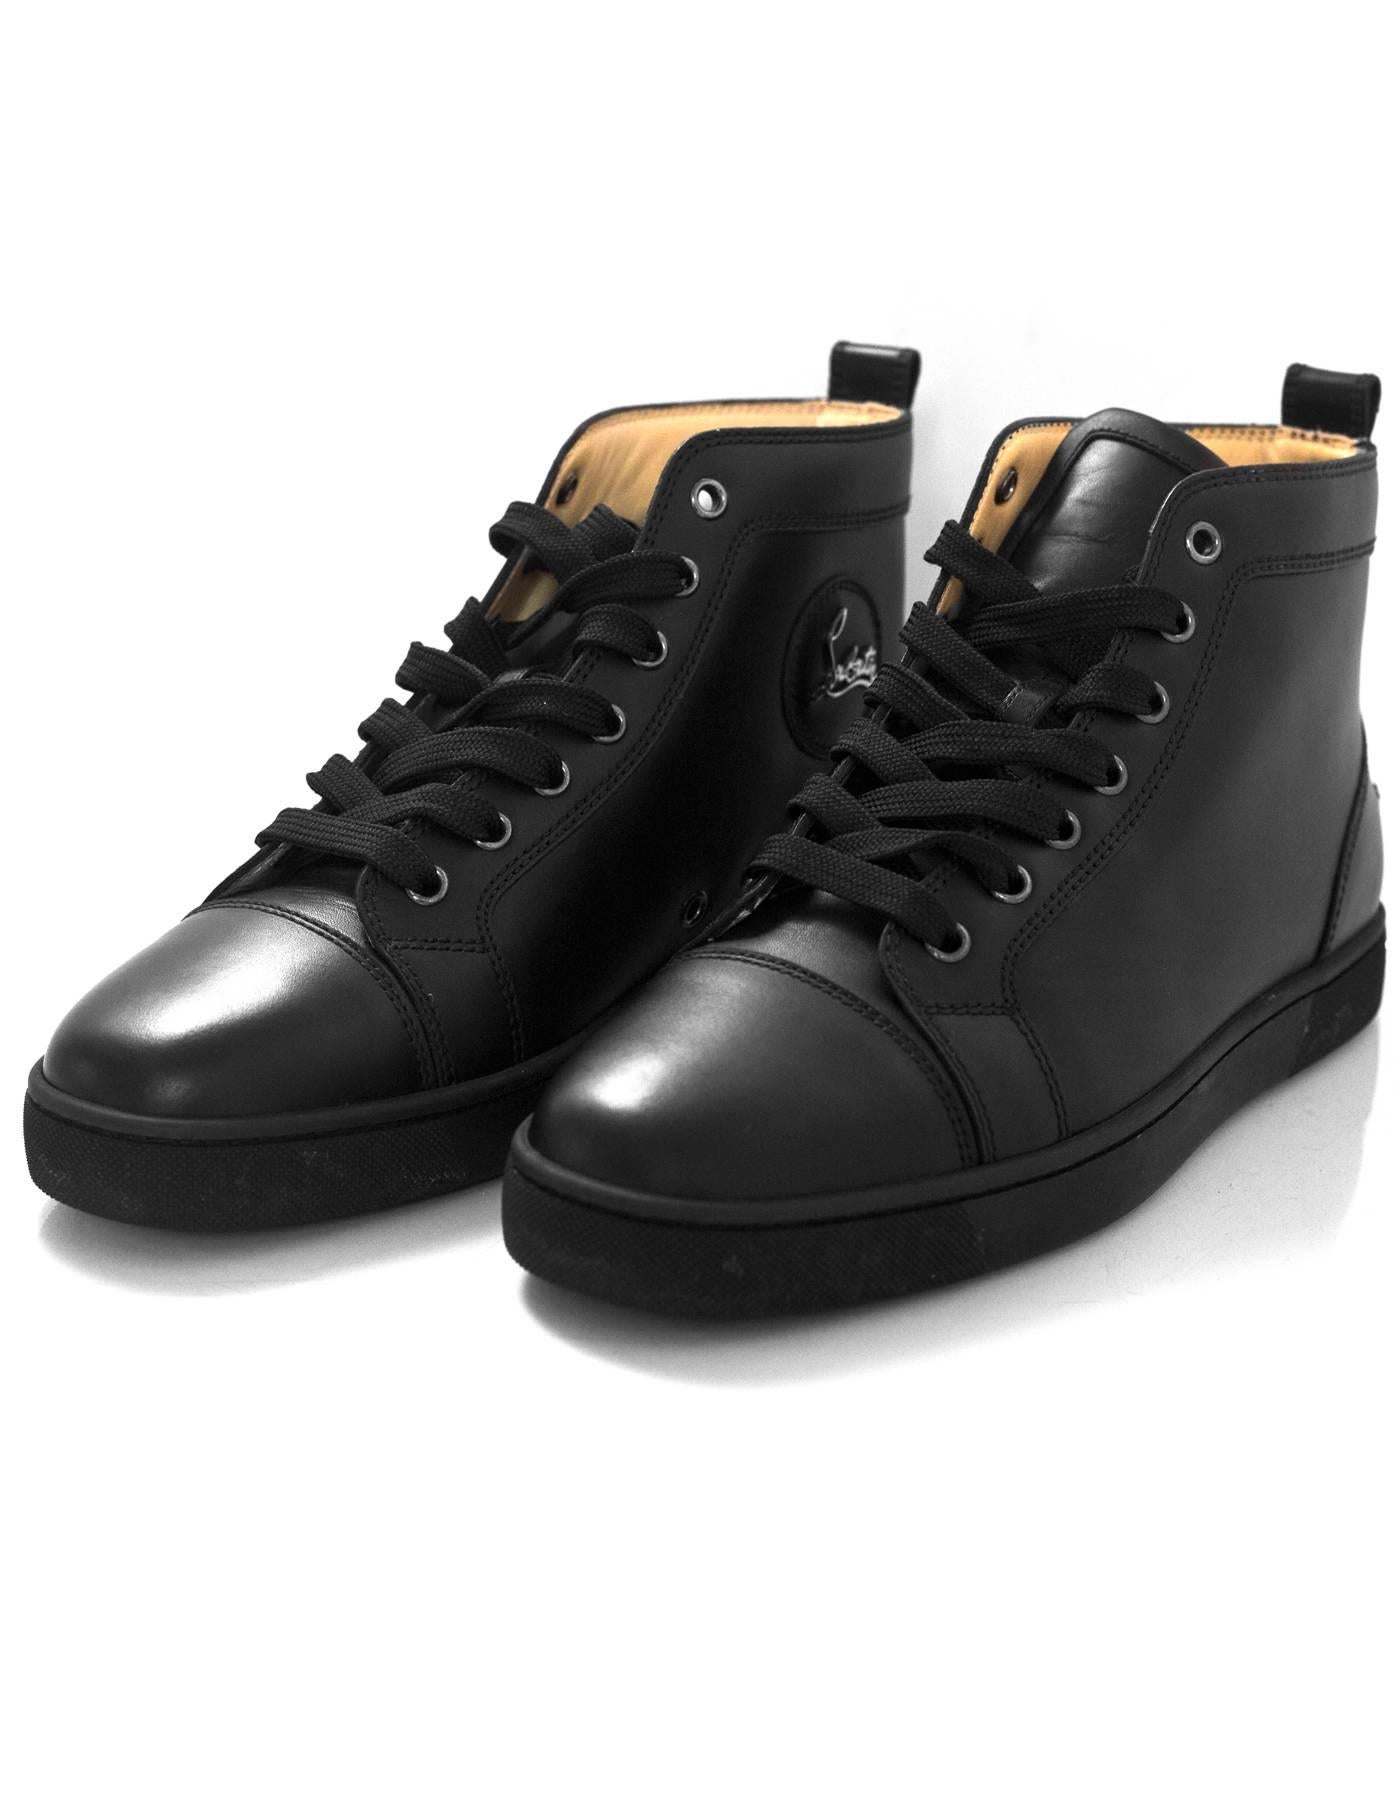 Christian Louboutin Black Leather Louis Sneakers Sz 40

Made In: EU
Color: Black
Materials: Leather, rubber
Closure/Opening: Lace tie closure
Sole Stamp: Christian Louboutin Made in EU
Retail Price: $898 + tax
Overall Condition: Excellent pre-owned